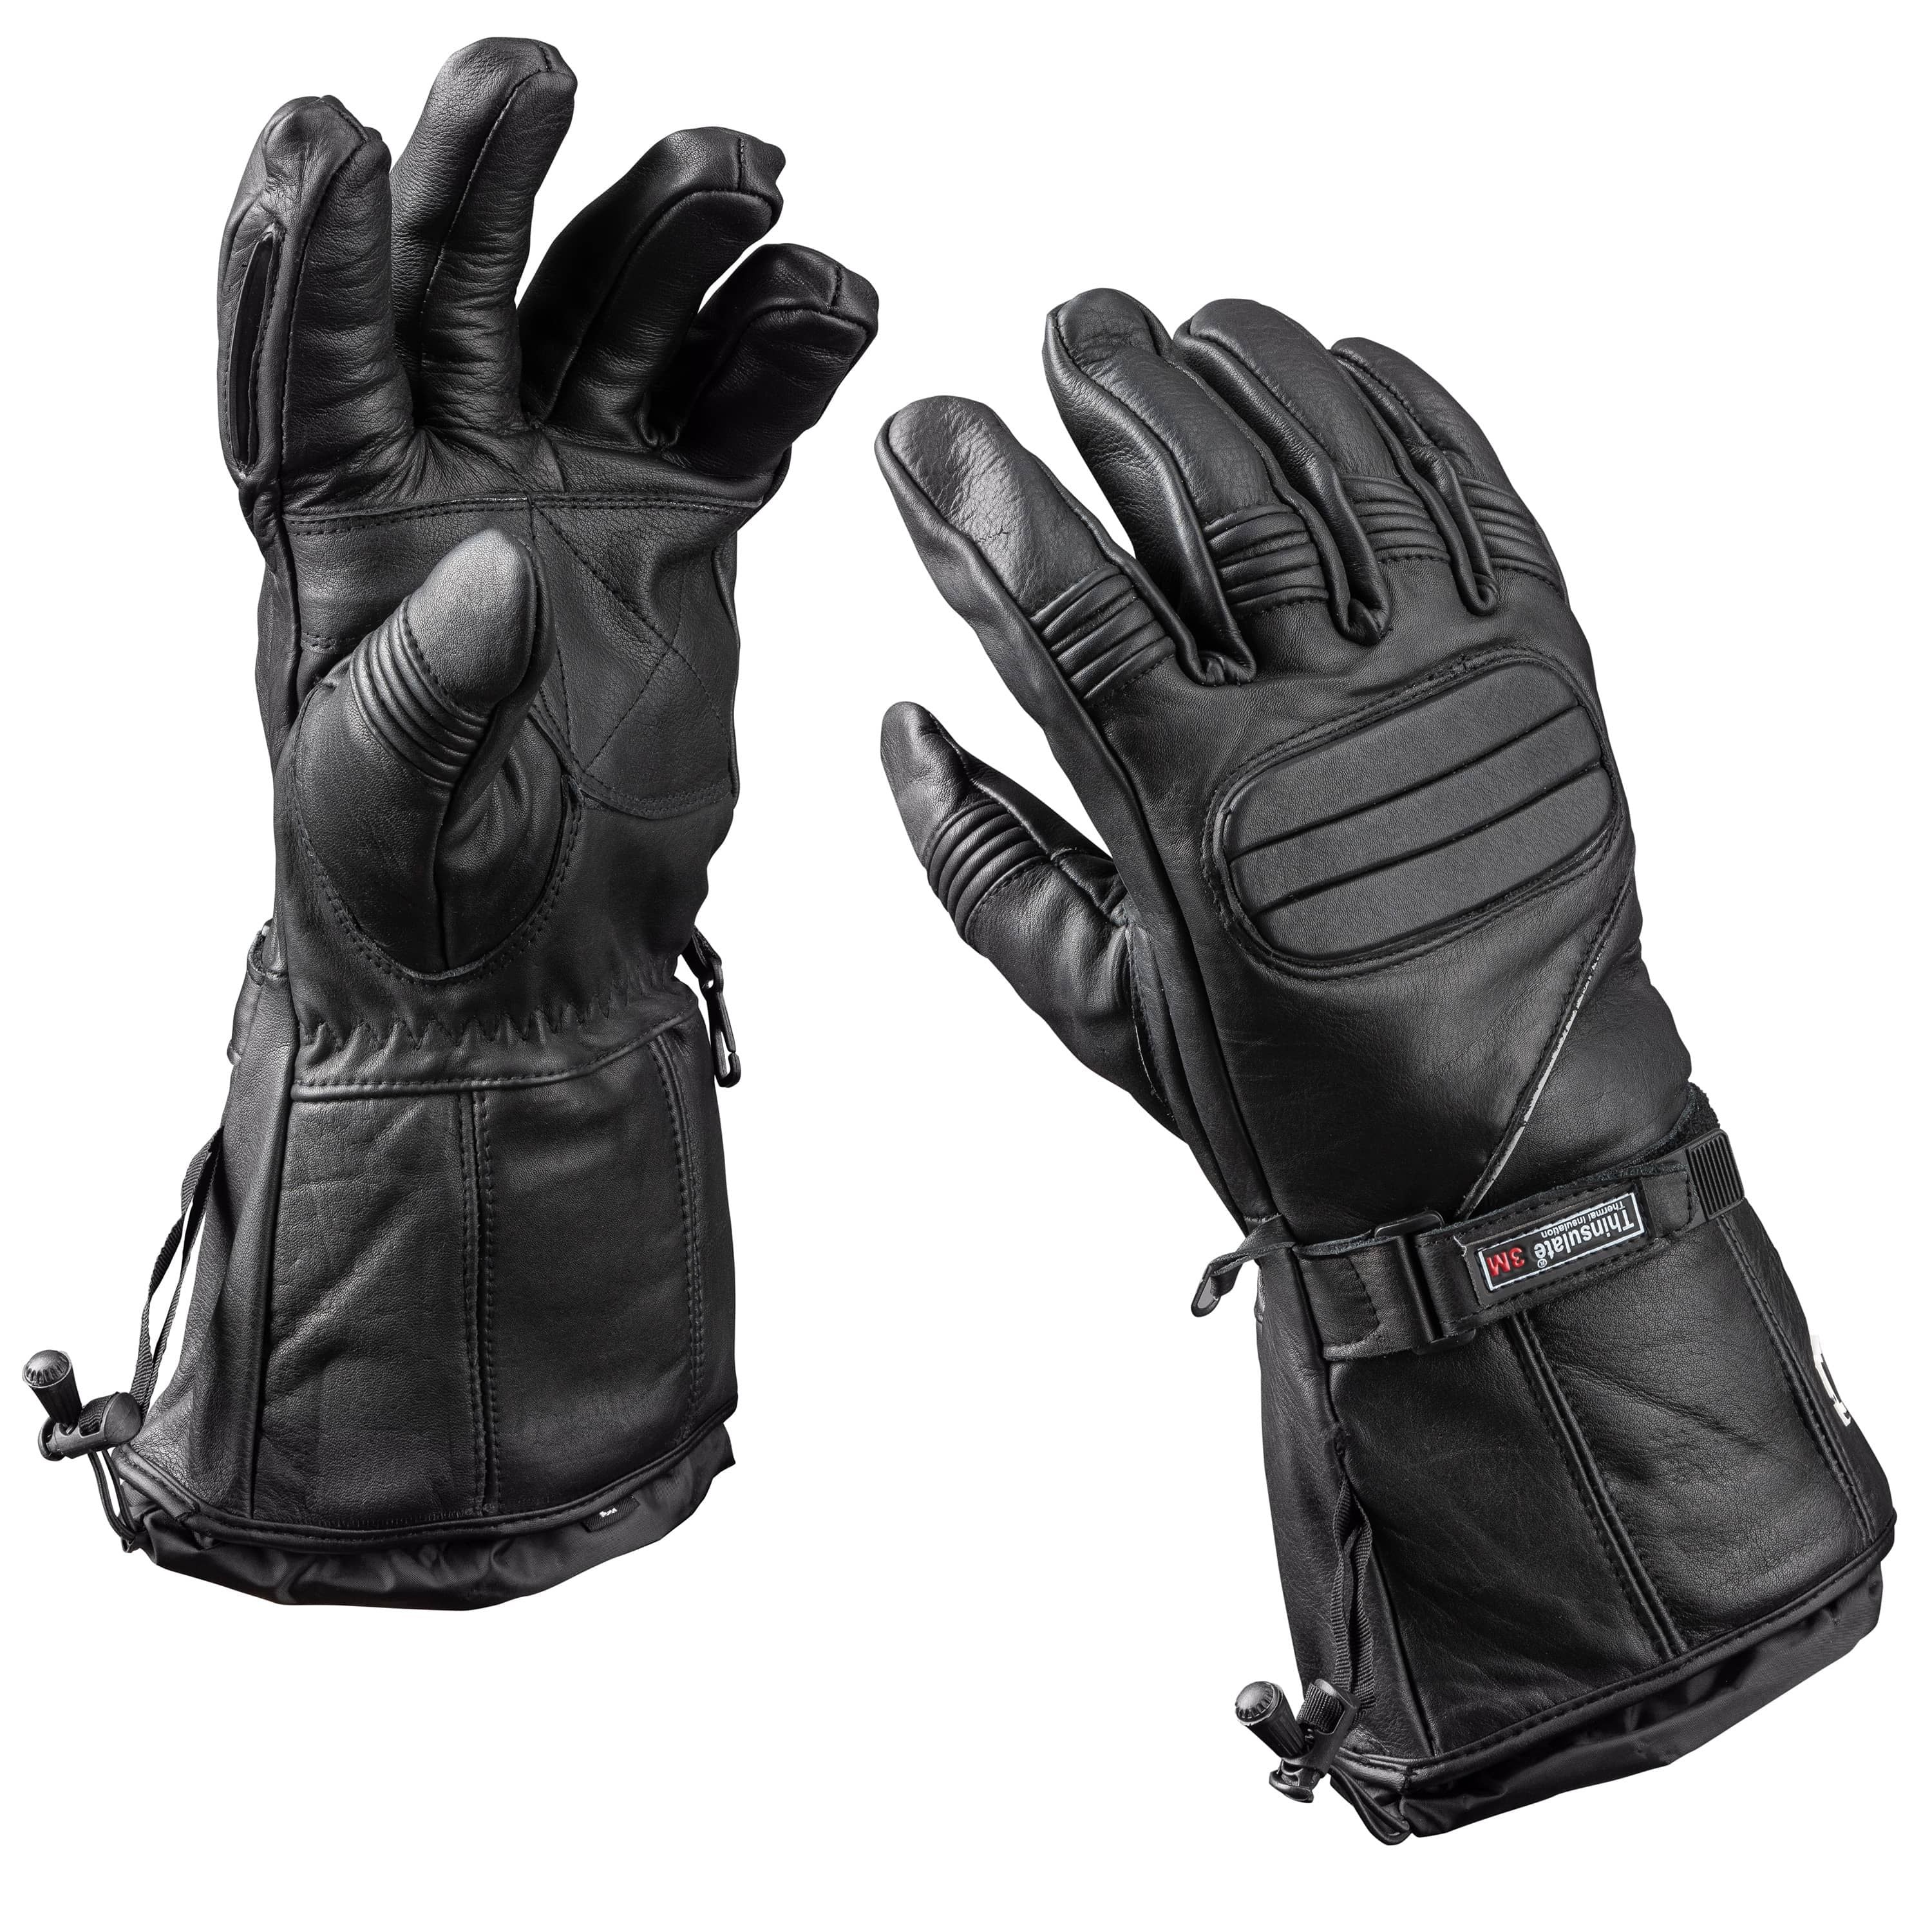 "Oze" Gloves with additional liner - Unisex